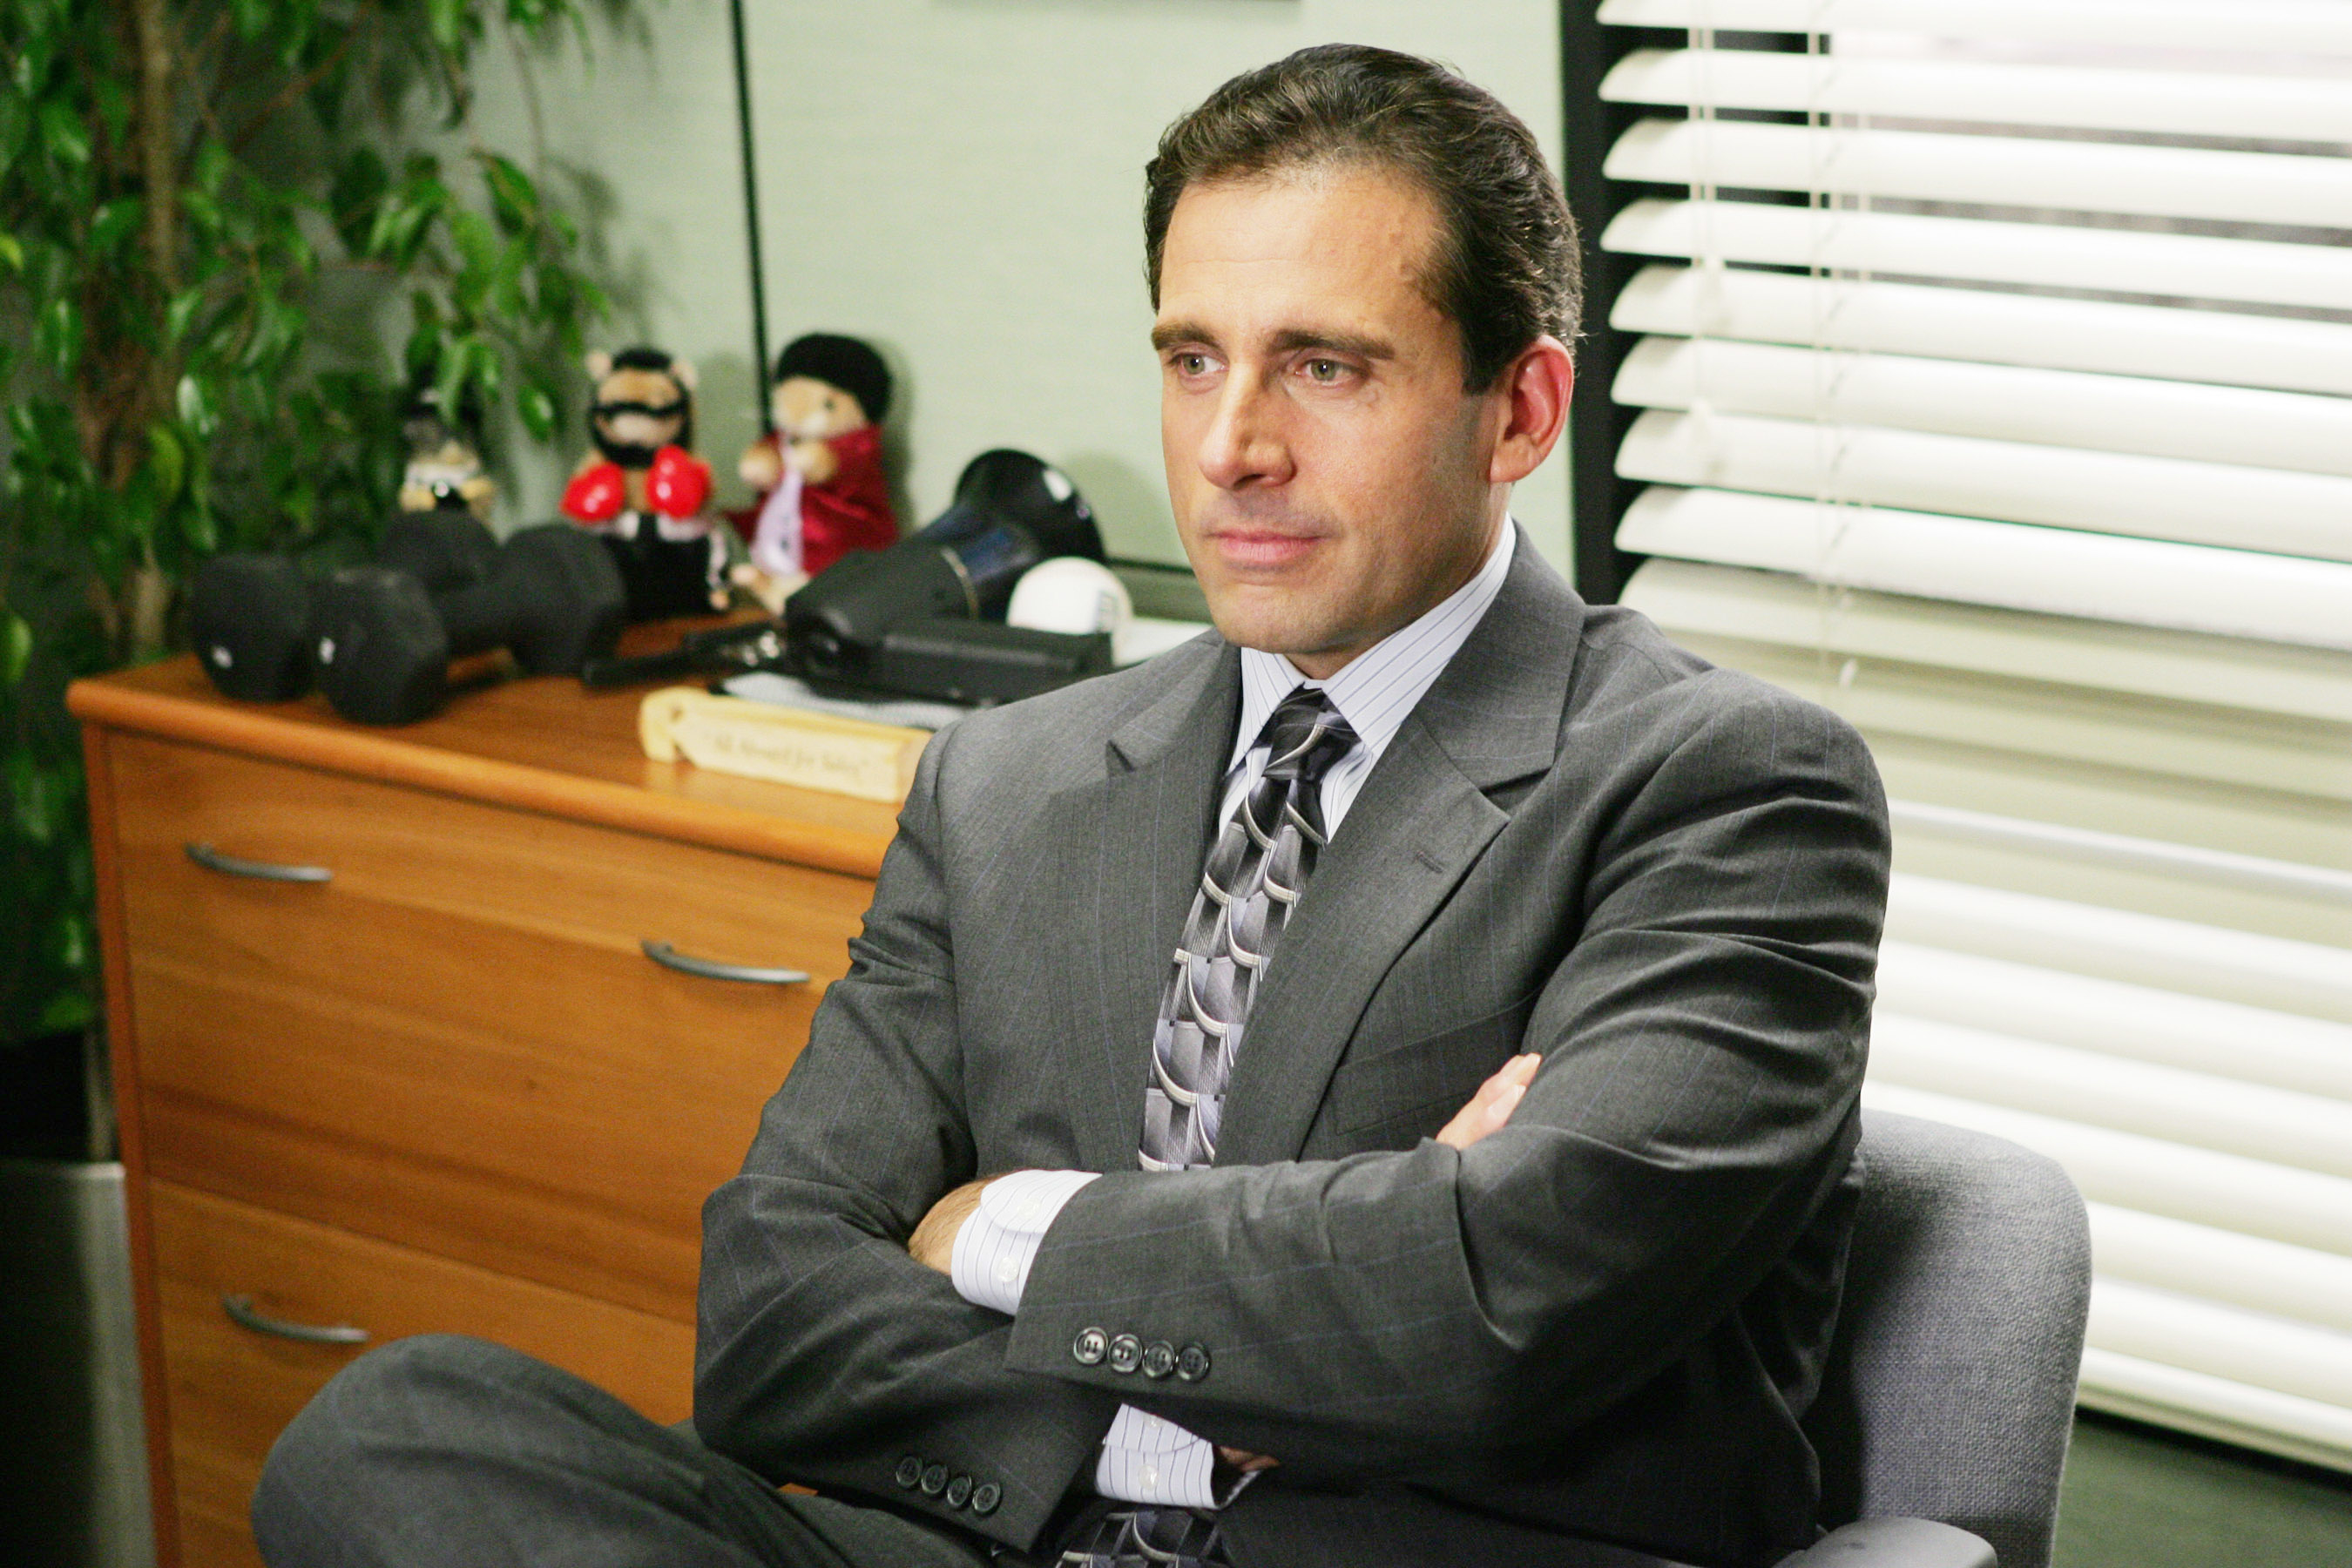 Actor in character as office manager sits behind desk with arms crossed, with toys and blinds in background